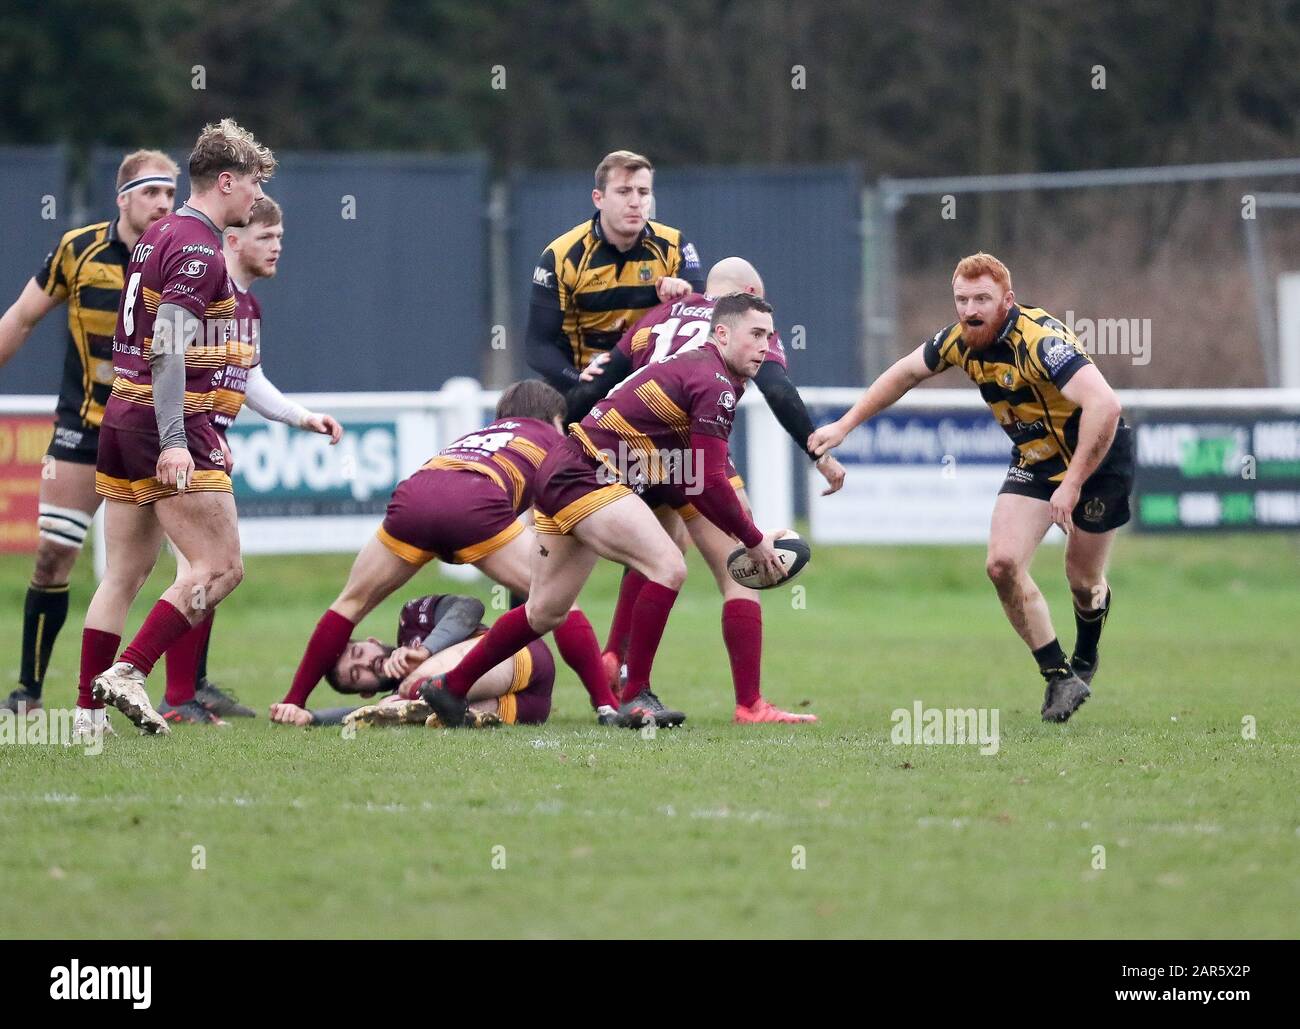 25.01.2020, Hinckley, Leicester, England. Rugby Union, Hinckley rfc v Sedgley Park rfc.   Danny Openshaw spins the ball out wide for Sedgley Park       during the RFU National League 2 North (NL2N) game played at the Leicester  Road Stadium. Stock Photo